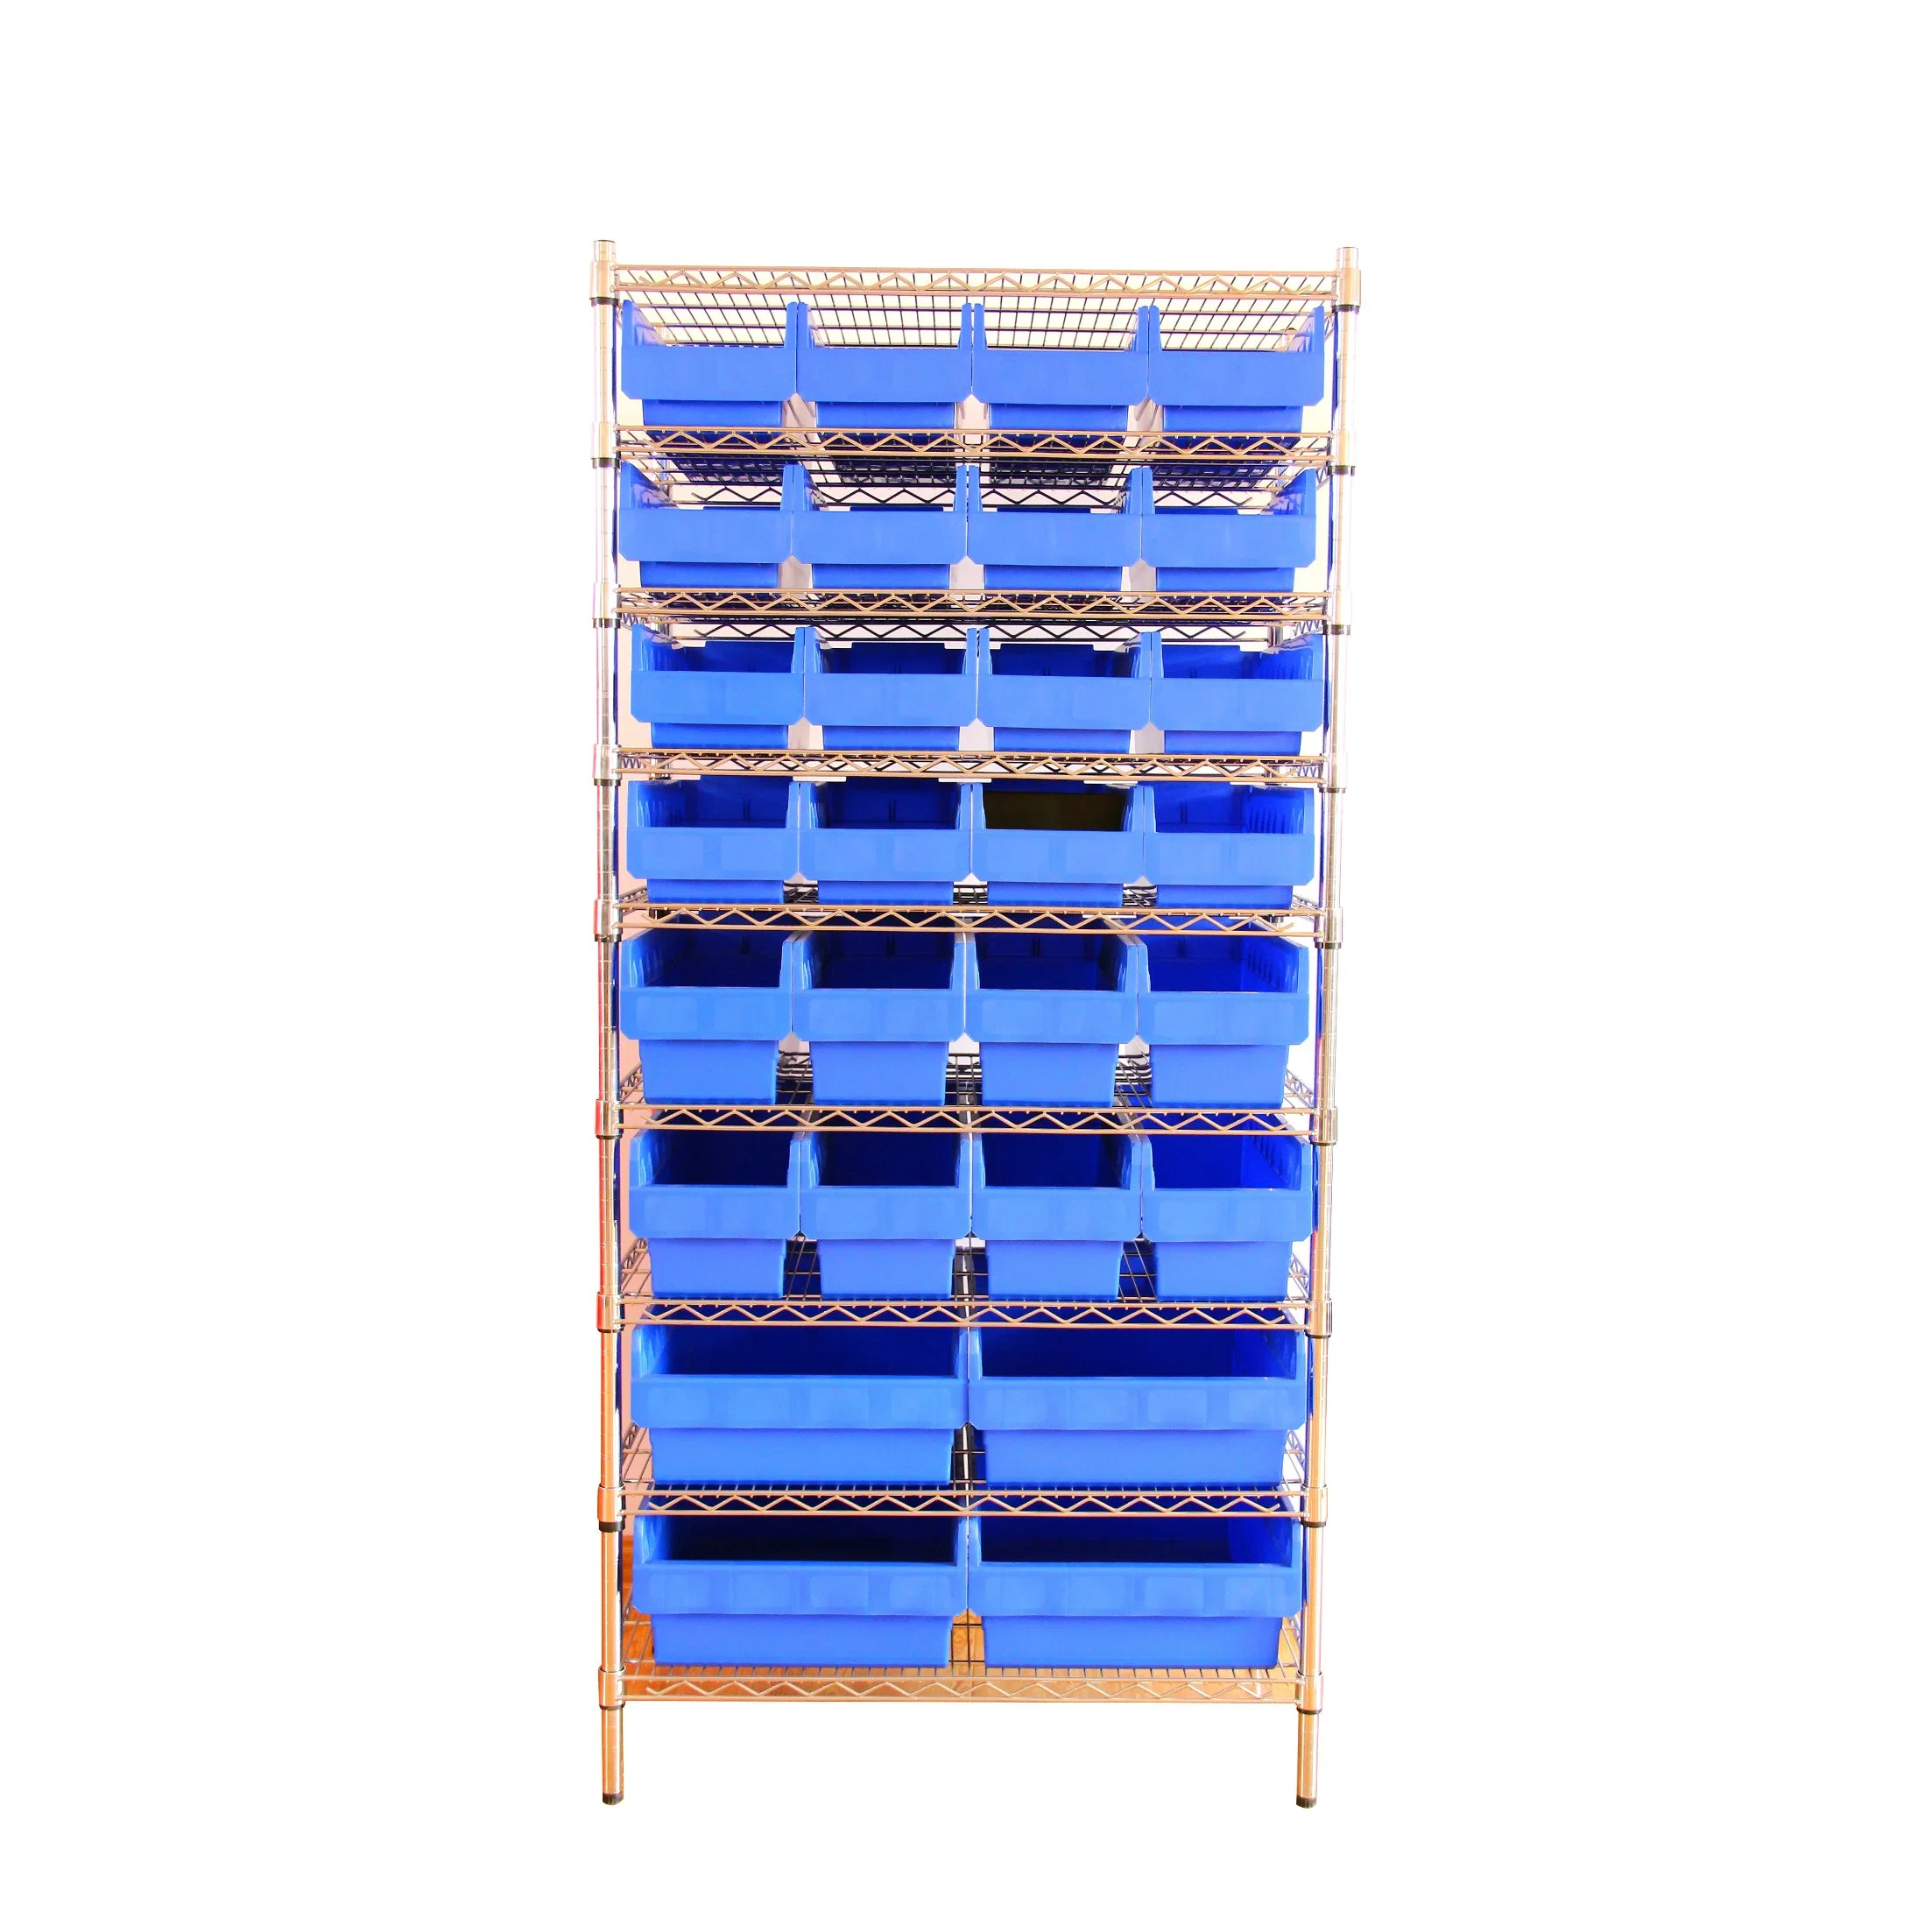 Stainless Steel Storage Wire Shelving